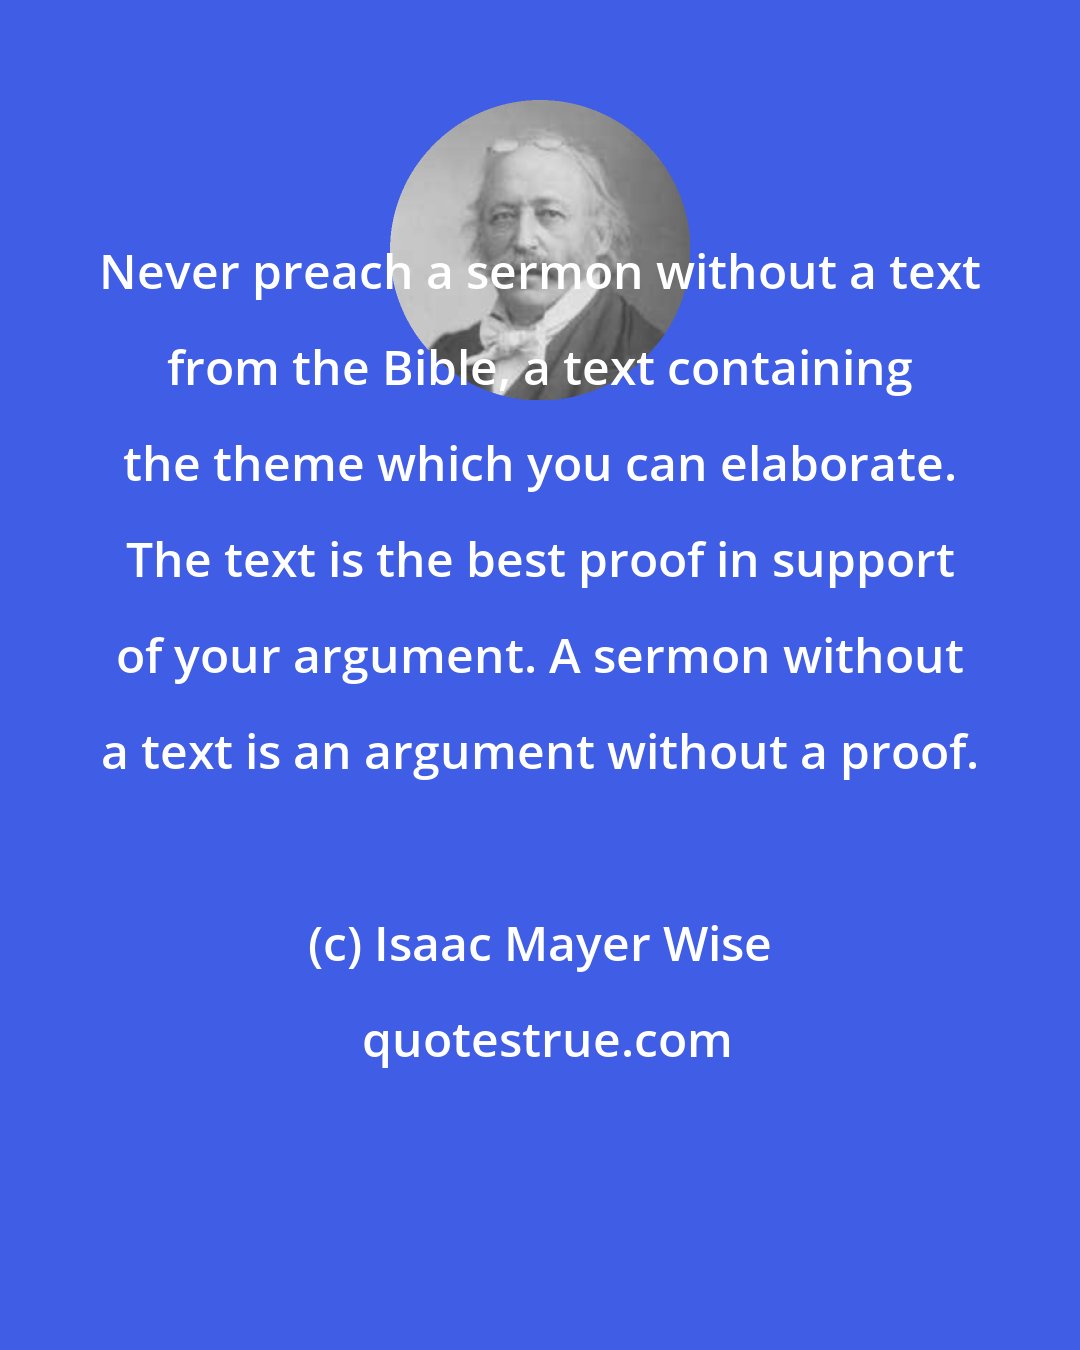 Isaac Mayer Wise: Never preach a sermon without a text from the Bible, a text containing the theme which you can elaborate. The text is the best proof in support of your argument. A sermon without a text is an argument without a proof.